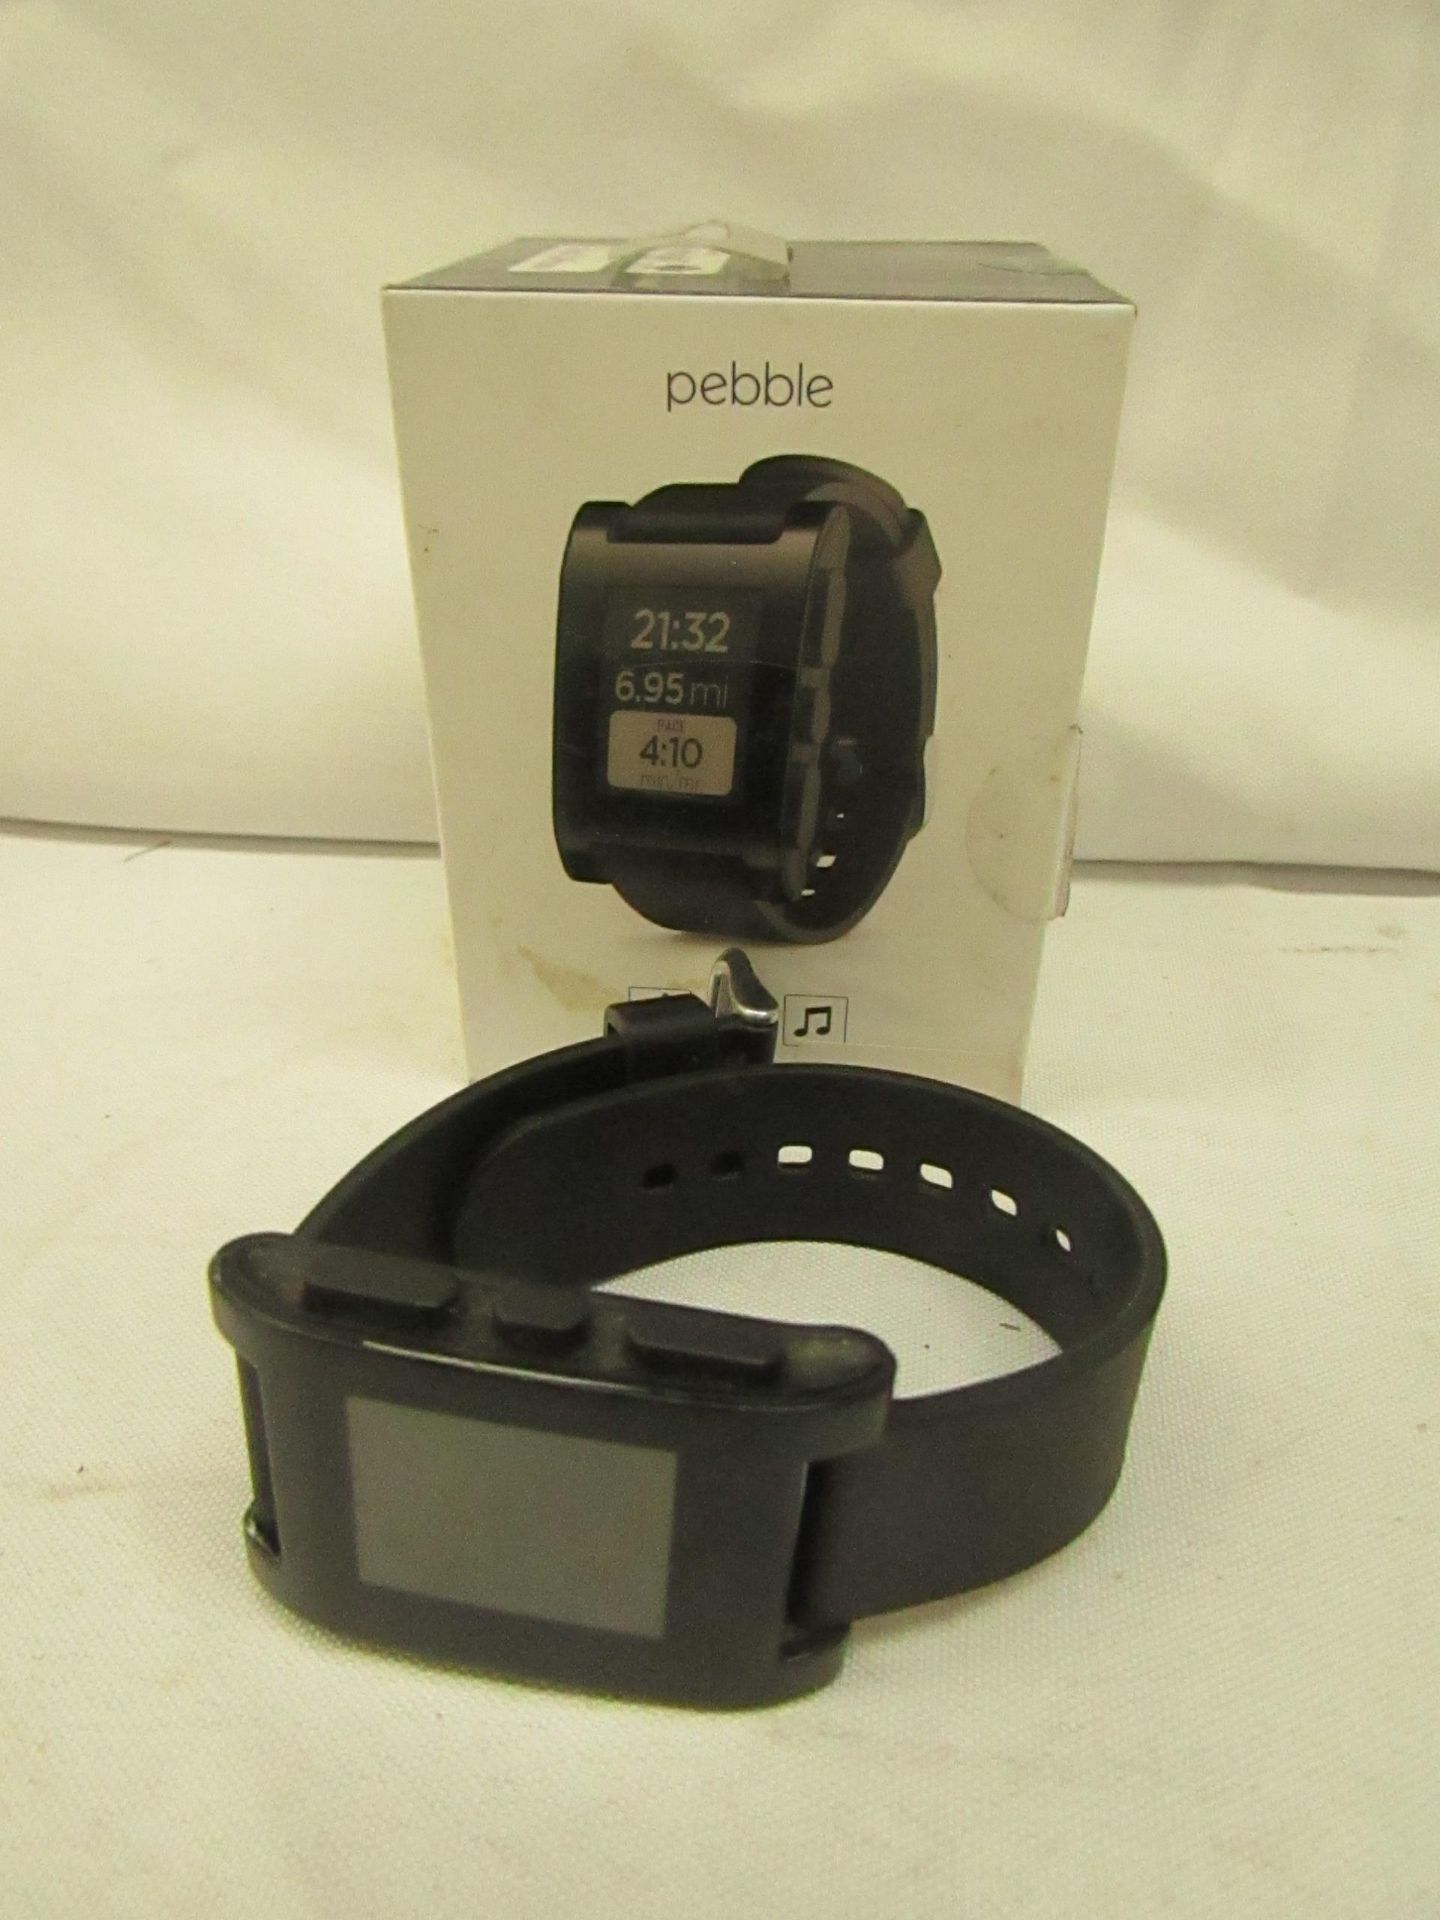 1x Pebble - Smart-Watch iPhone Android Compatible - Black - Untested & Boxed.